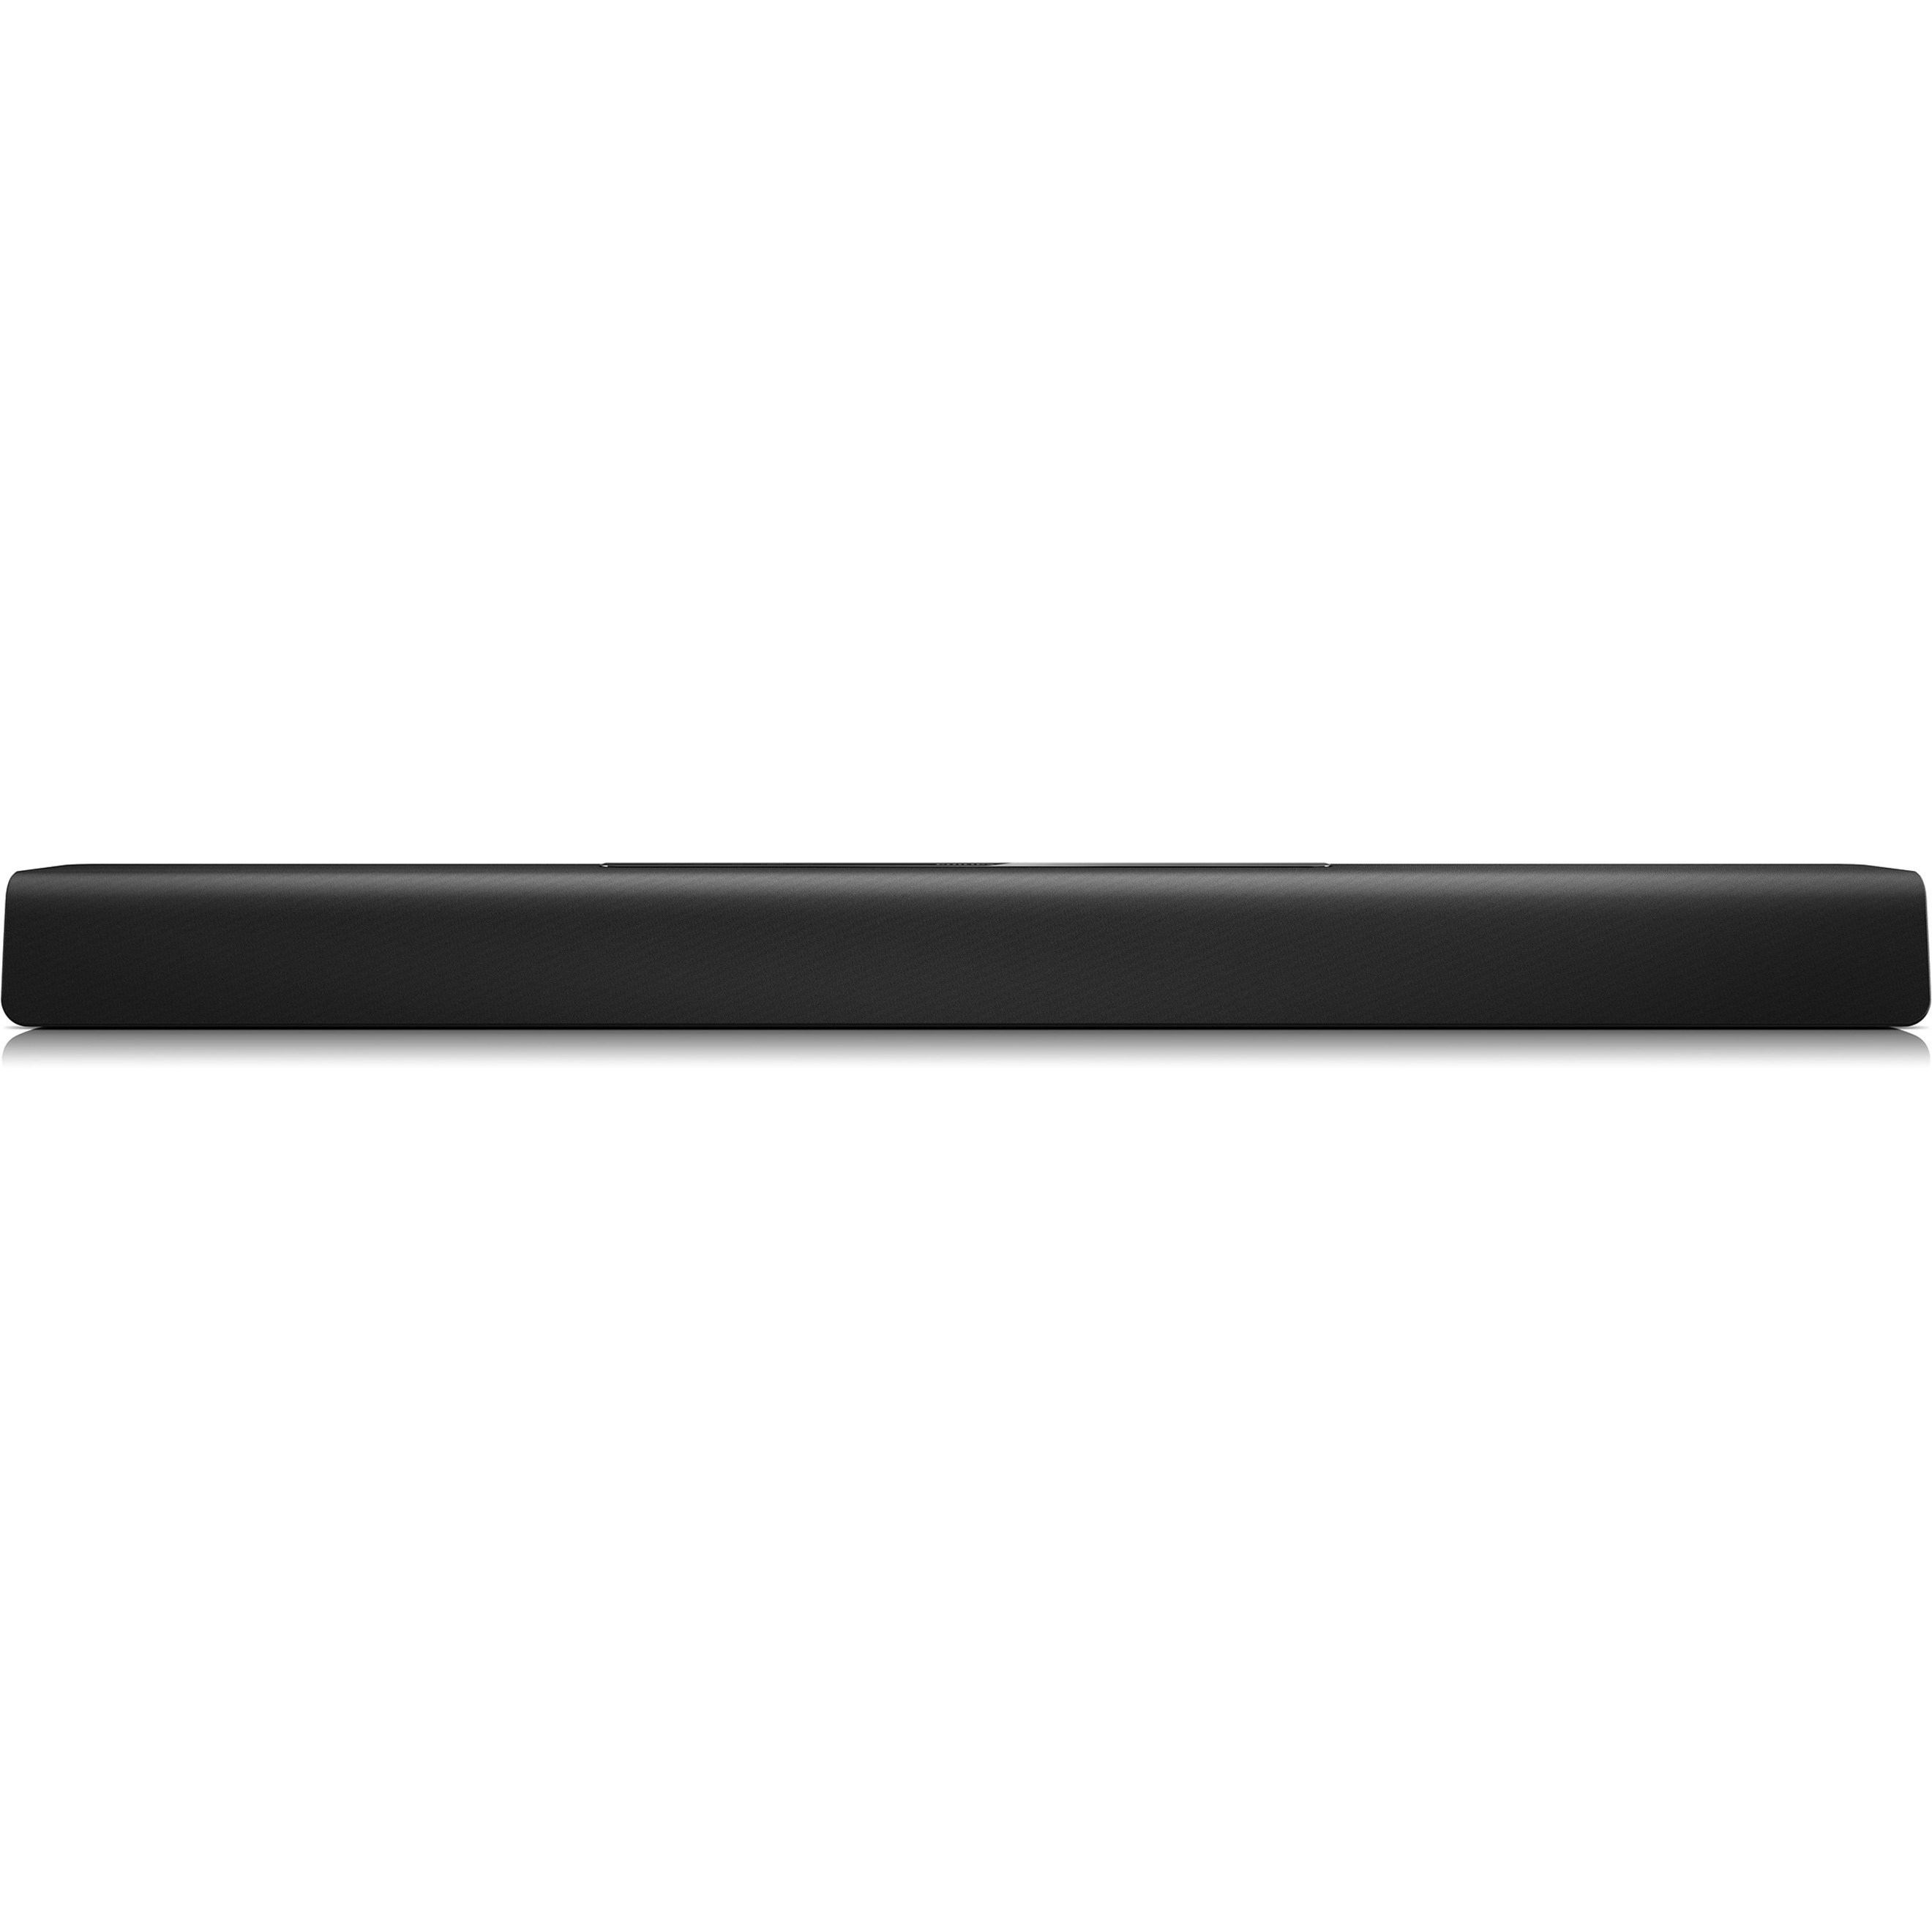 Philips HTL2101A - Sound bar - for home theater - 40 Watt (total) - image 1 of 4